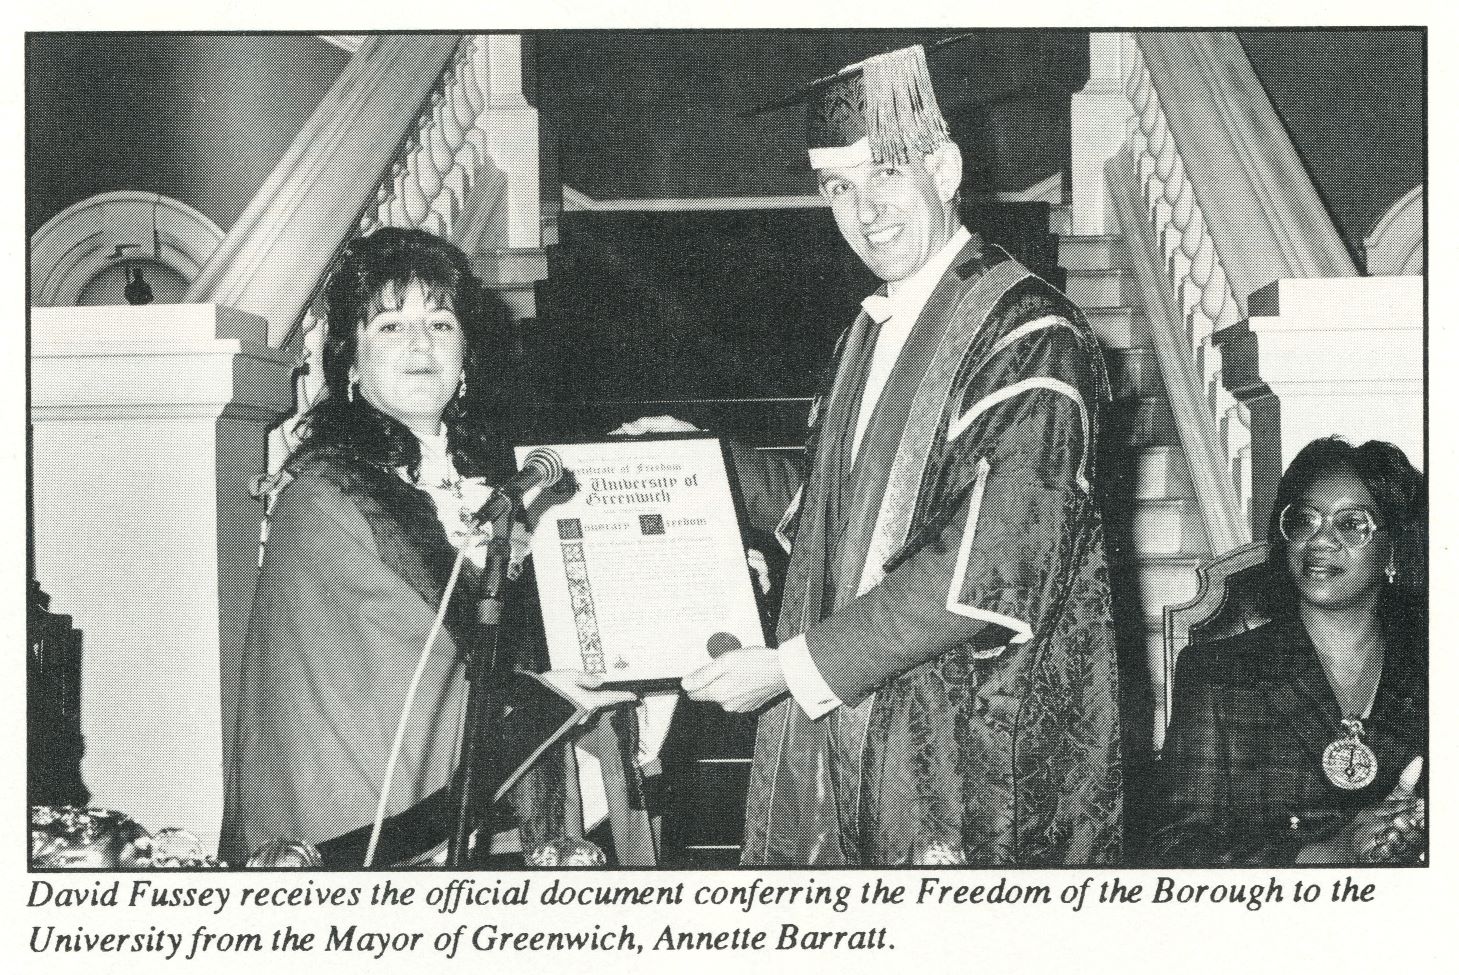 David Fussey receives the official document conferring the Freedom of the Borough to the University from the Mayor of Greenwich, Annette Barratt.in 1994